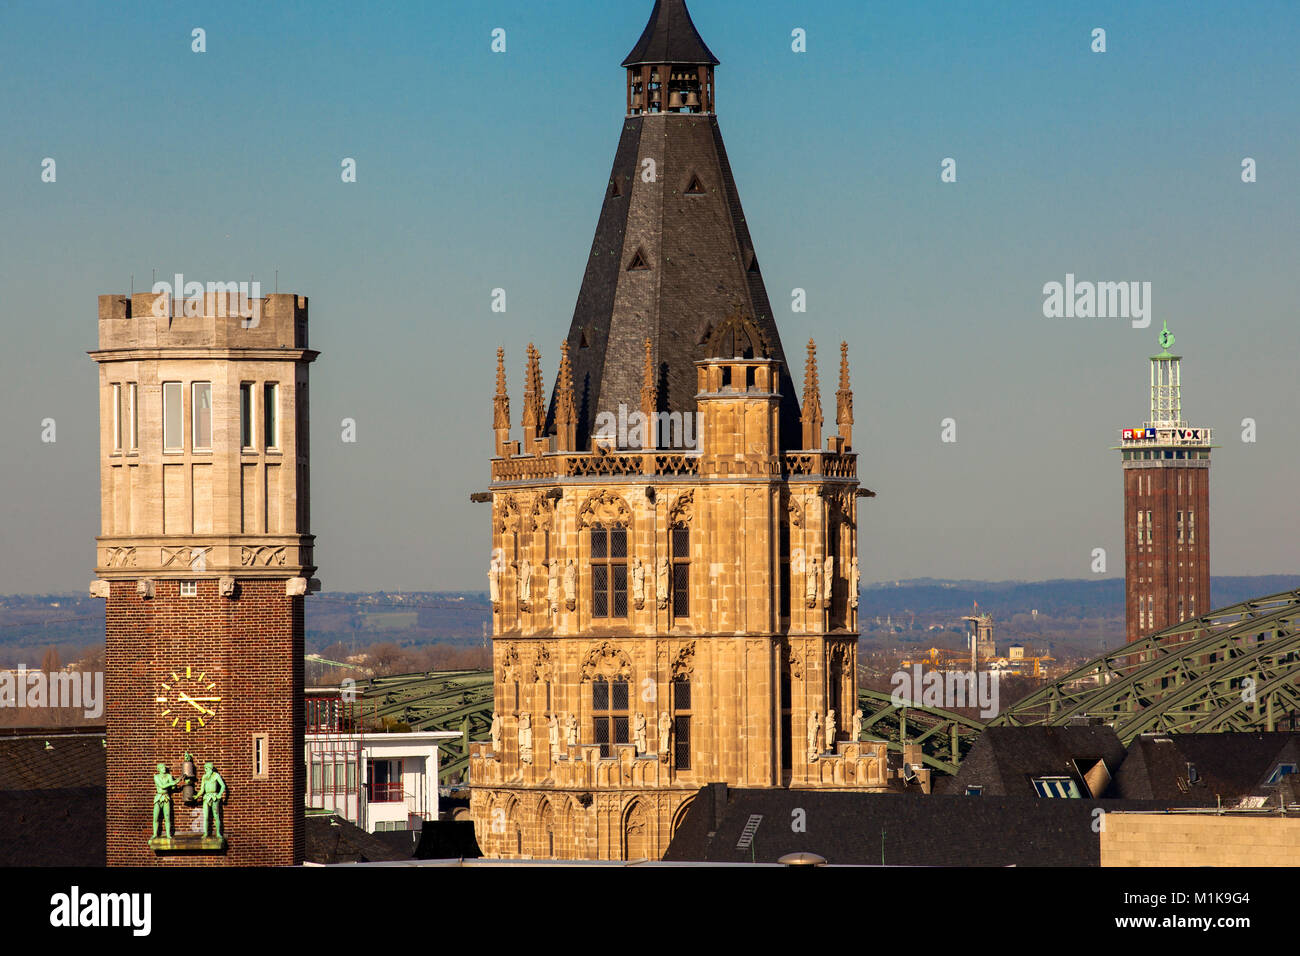 Germany, Cologne, tower of the building Haus Neuerburg in the historic town, the tower of the historic town hall, in the background the old tower of t Stock Photo